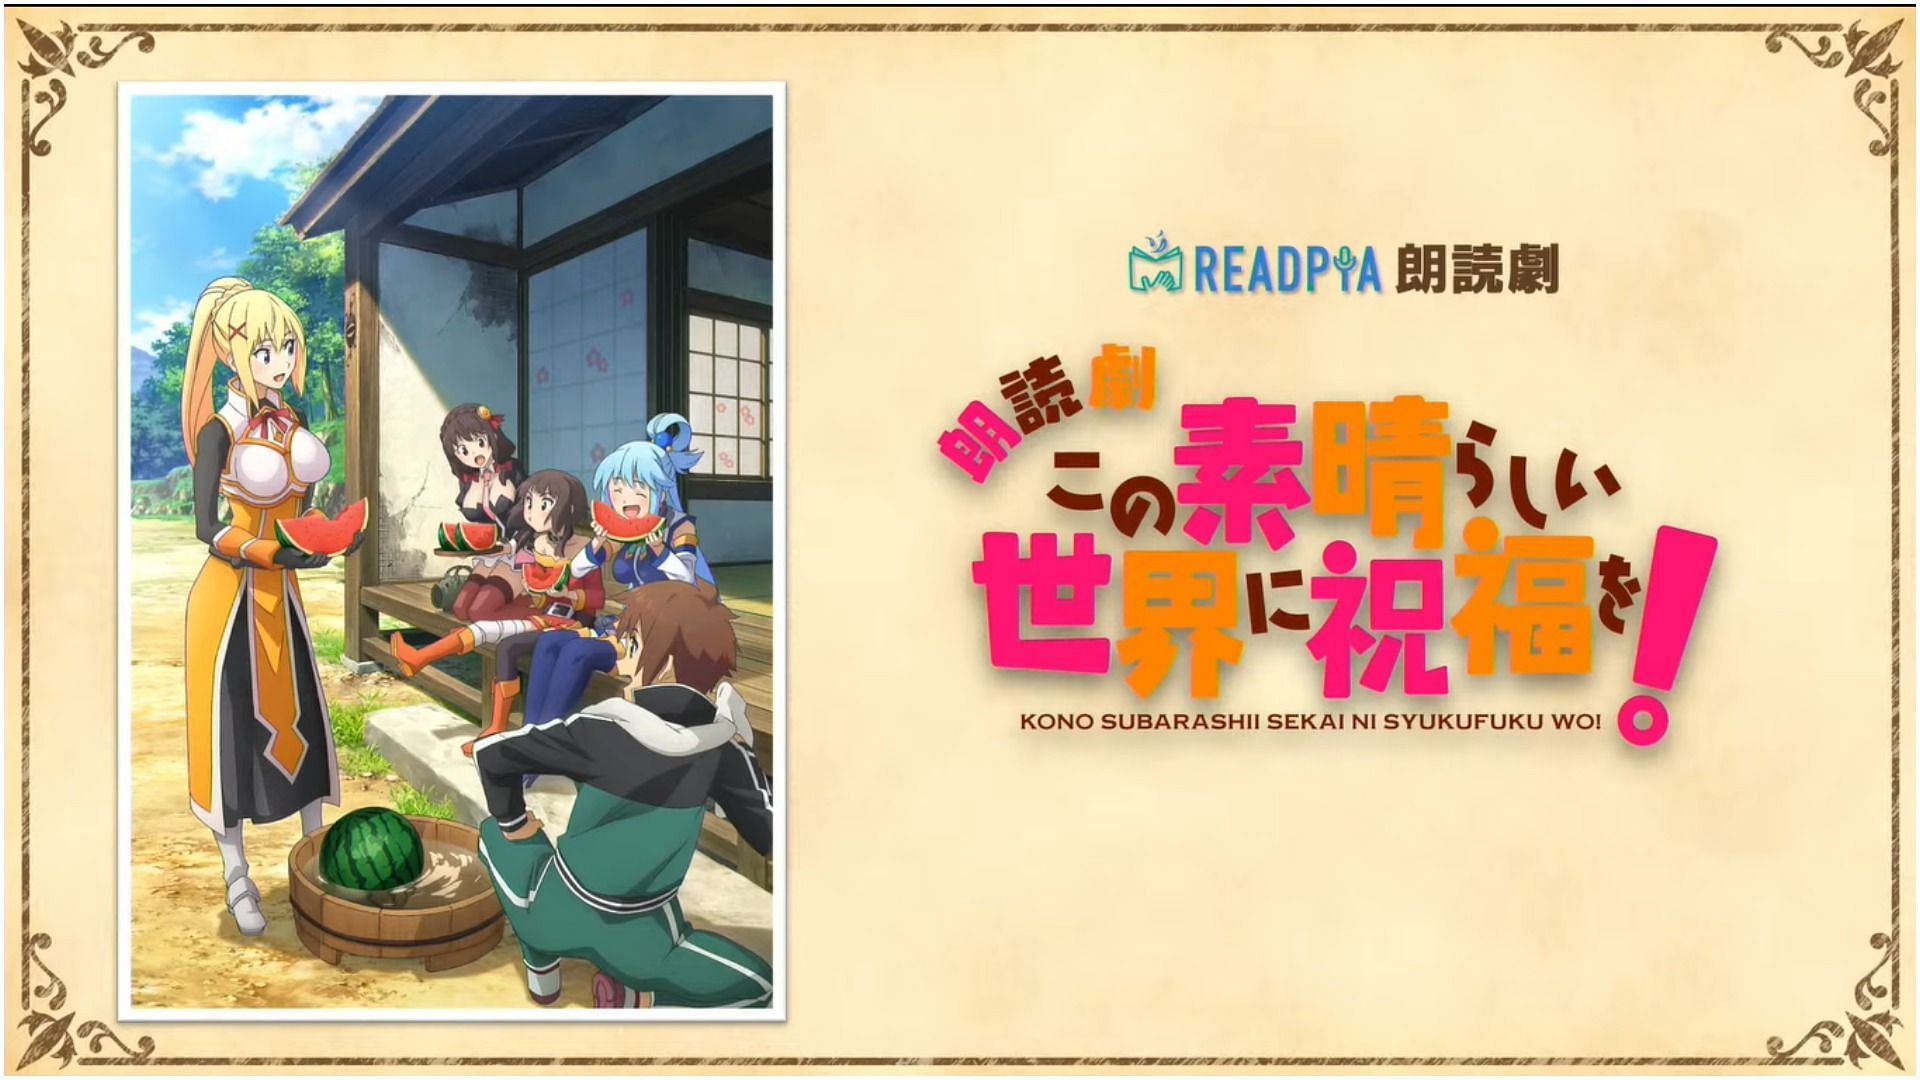 DaiDai on X: KONOSUBA SEASON 3 PV THERE'S ALSO A WEBSITE WHICH POSTED NEW  CHARACTER DESIGNS, INCLUDING IRIA    / X